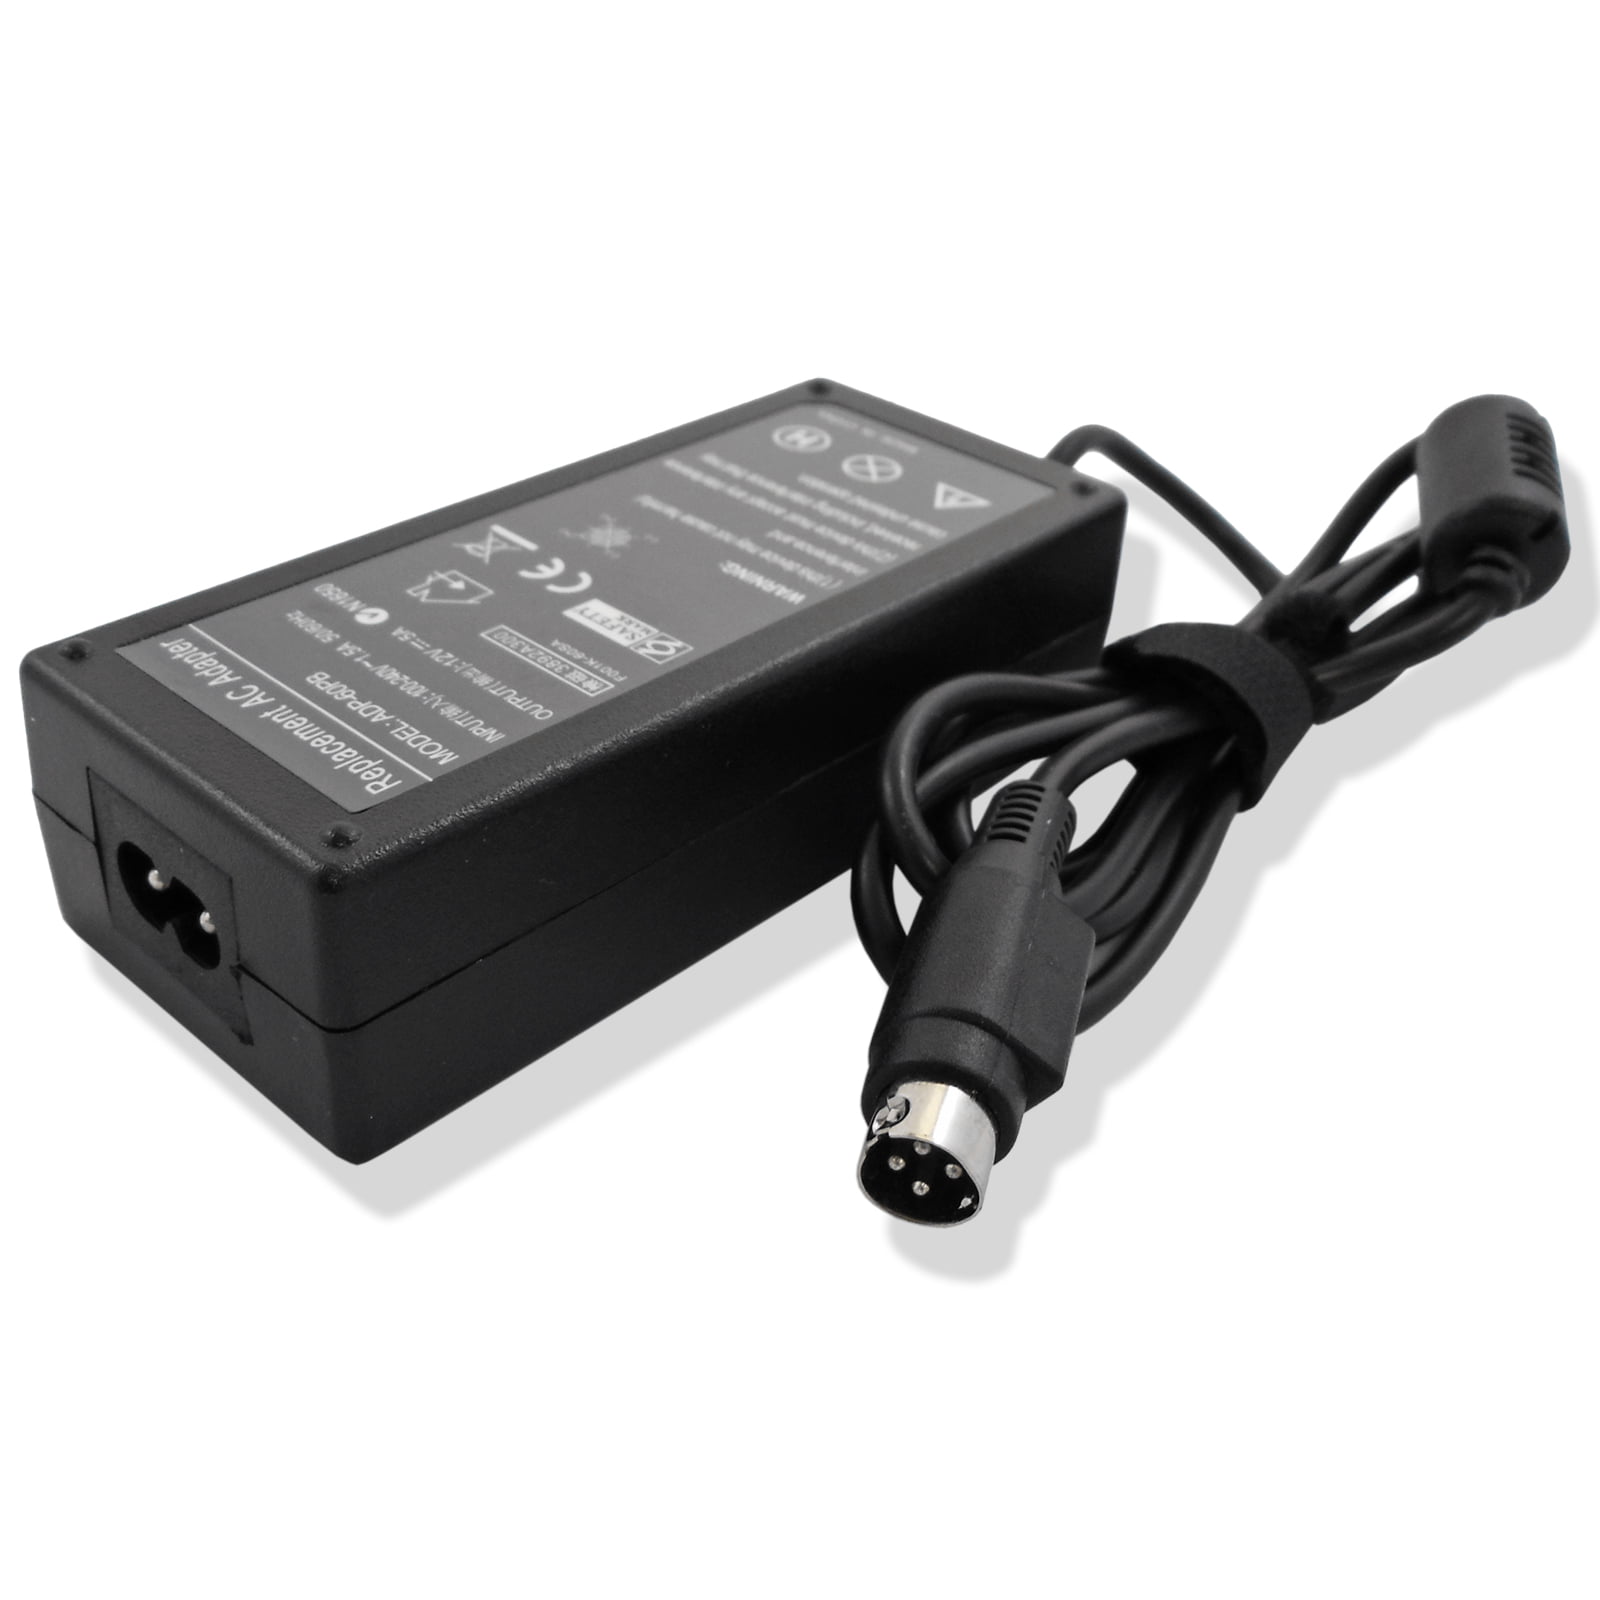 4 PIN 12V 5A AC Adapter Charger for Sanyo CLT2054 LCD TV Monitor Power Supply 